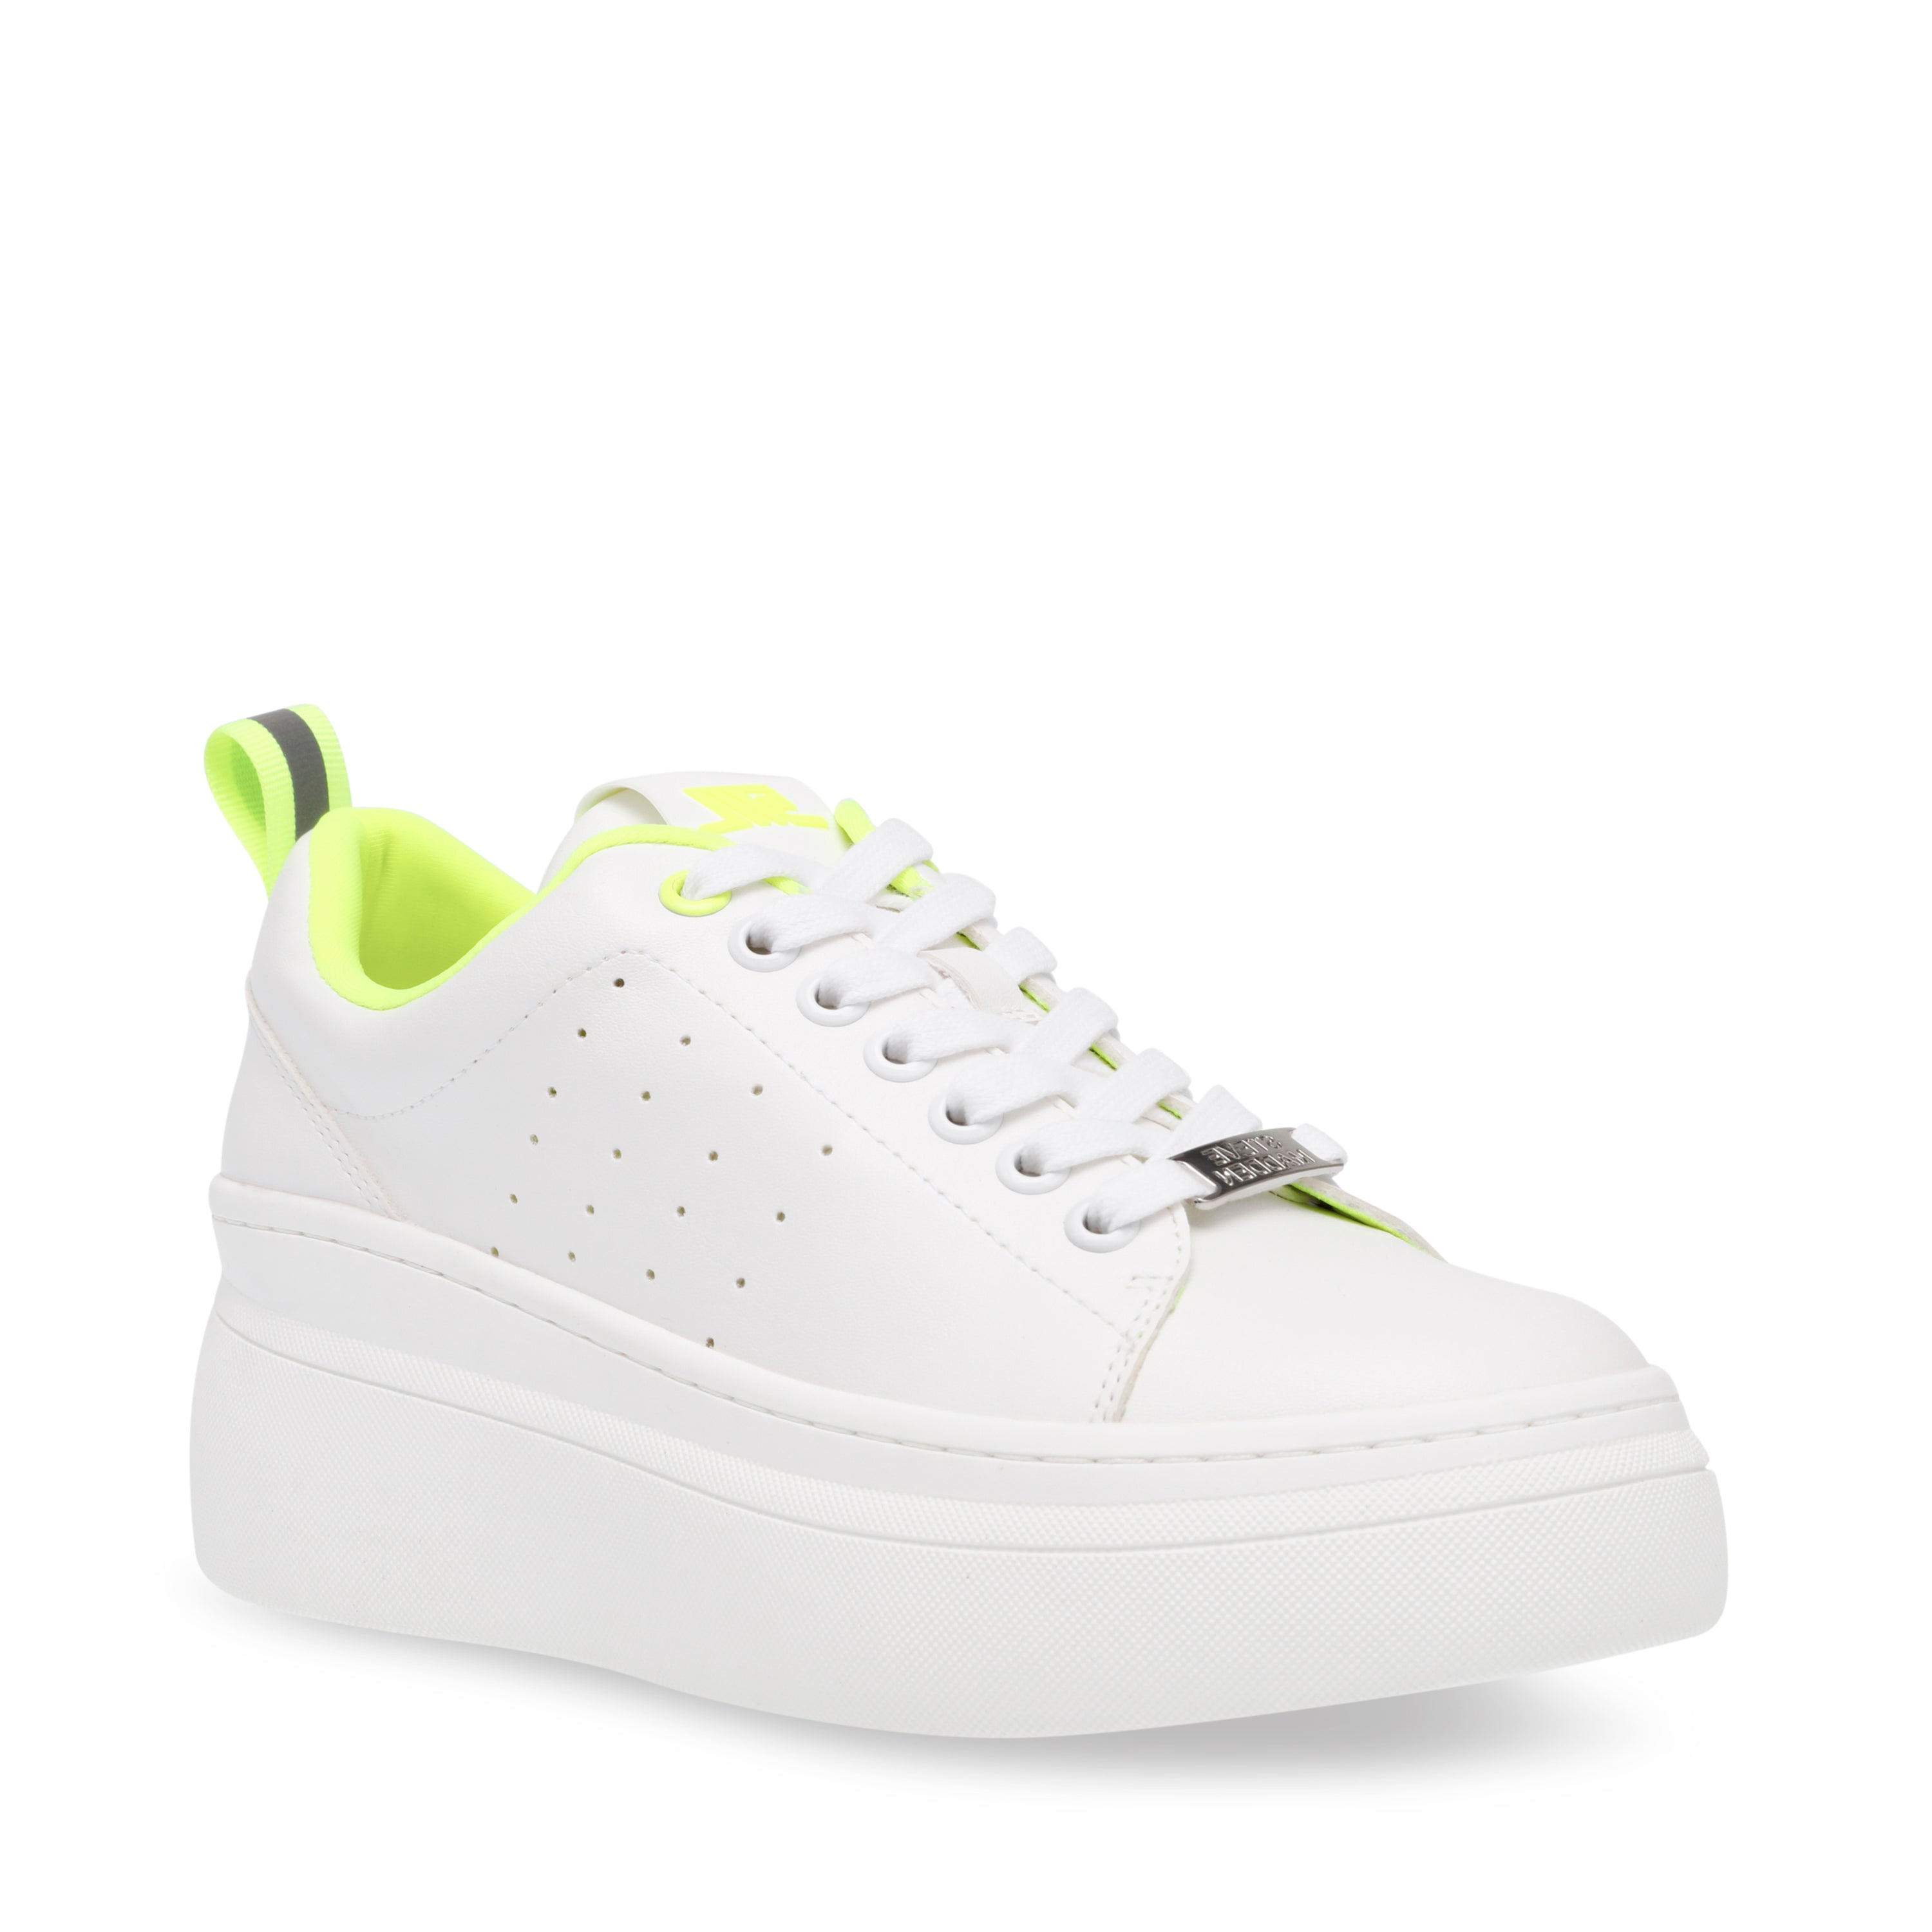 ALL STAR WHITE/LIME- Hover Image